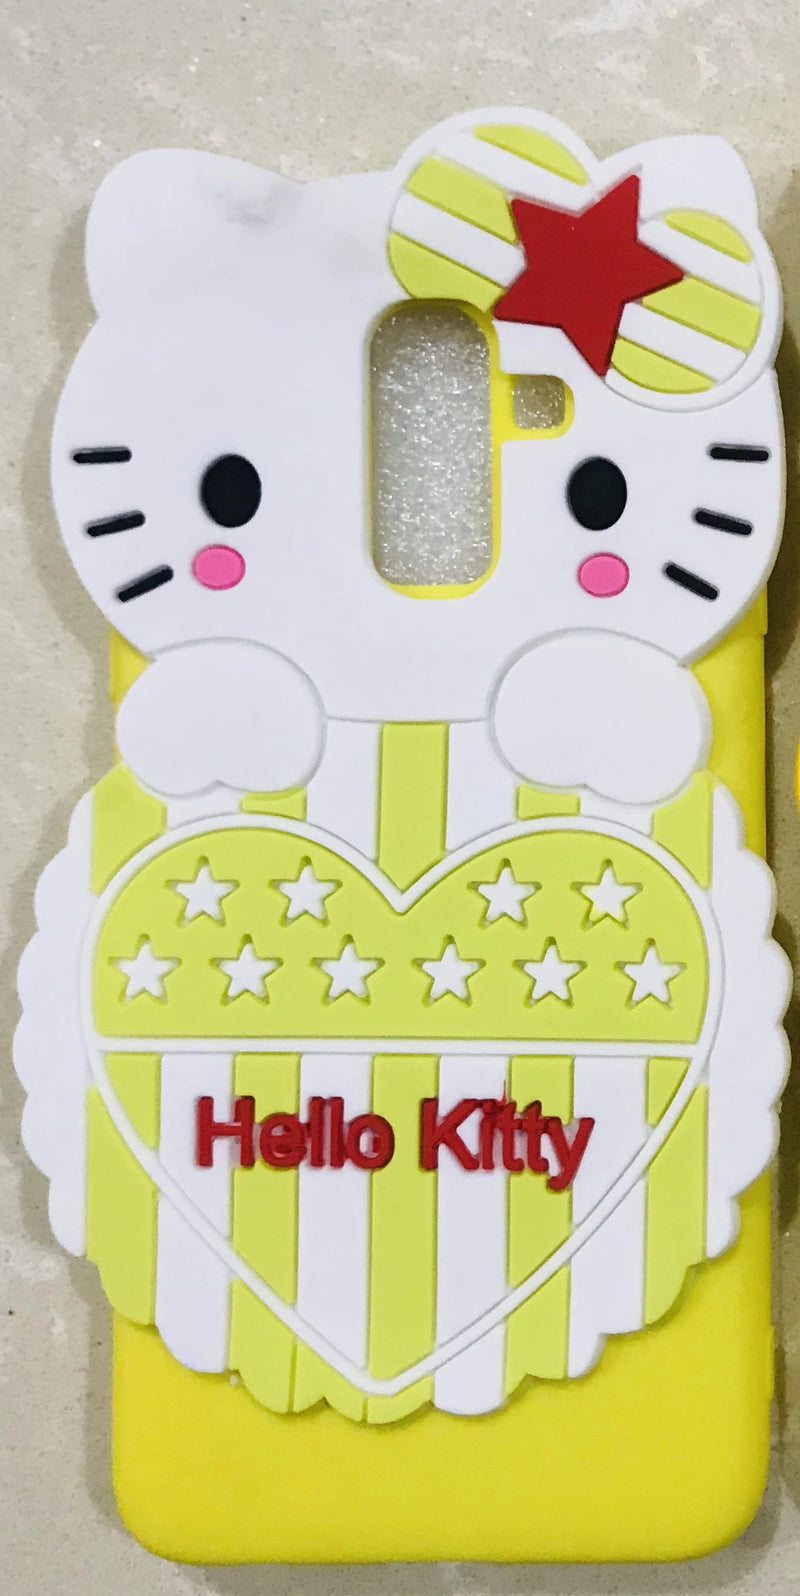 Girl's Back Cover Hello Kitty Silicon for Samsung J8 - AHFK00830005FKSSJ8C Pink | Yellow | Black